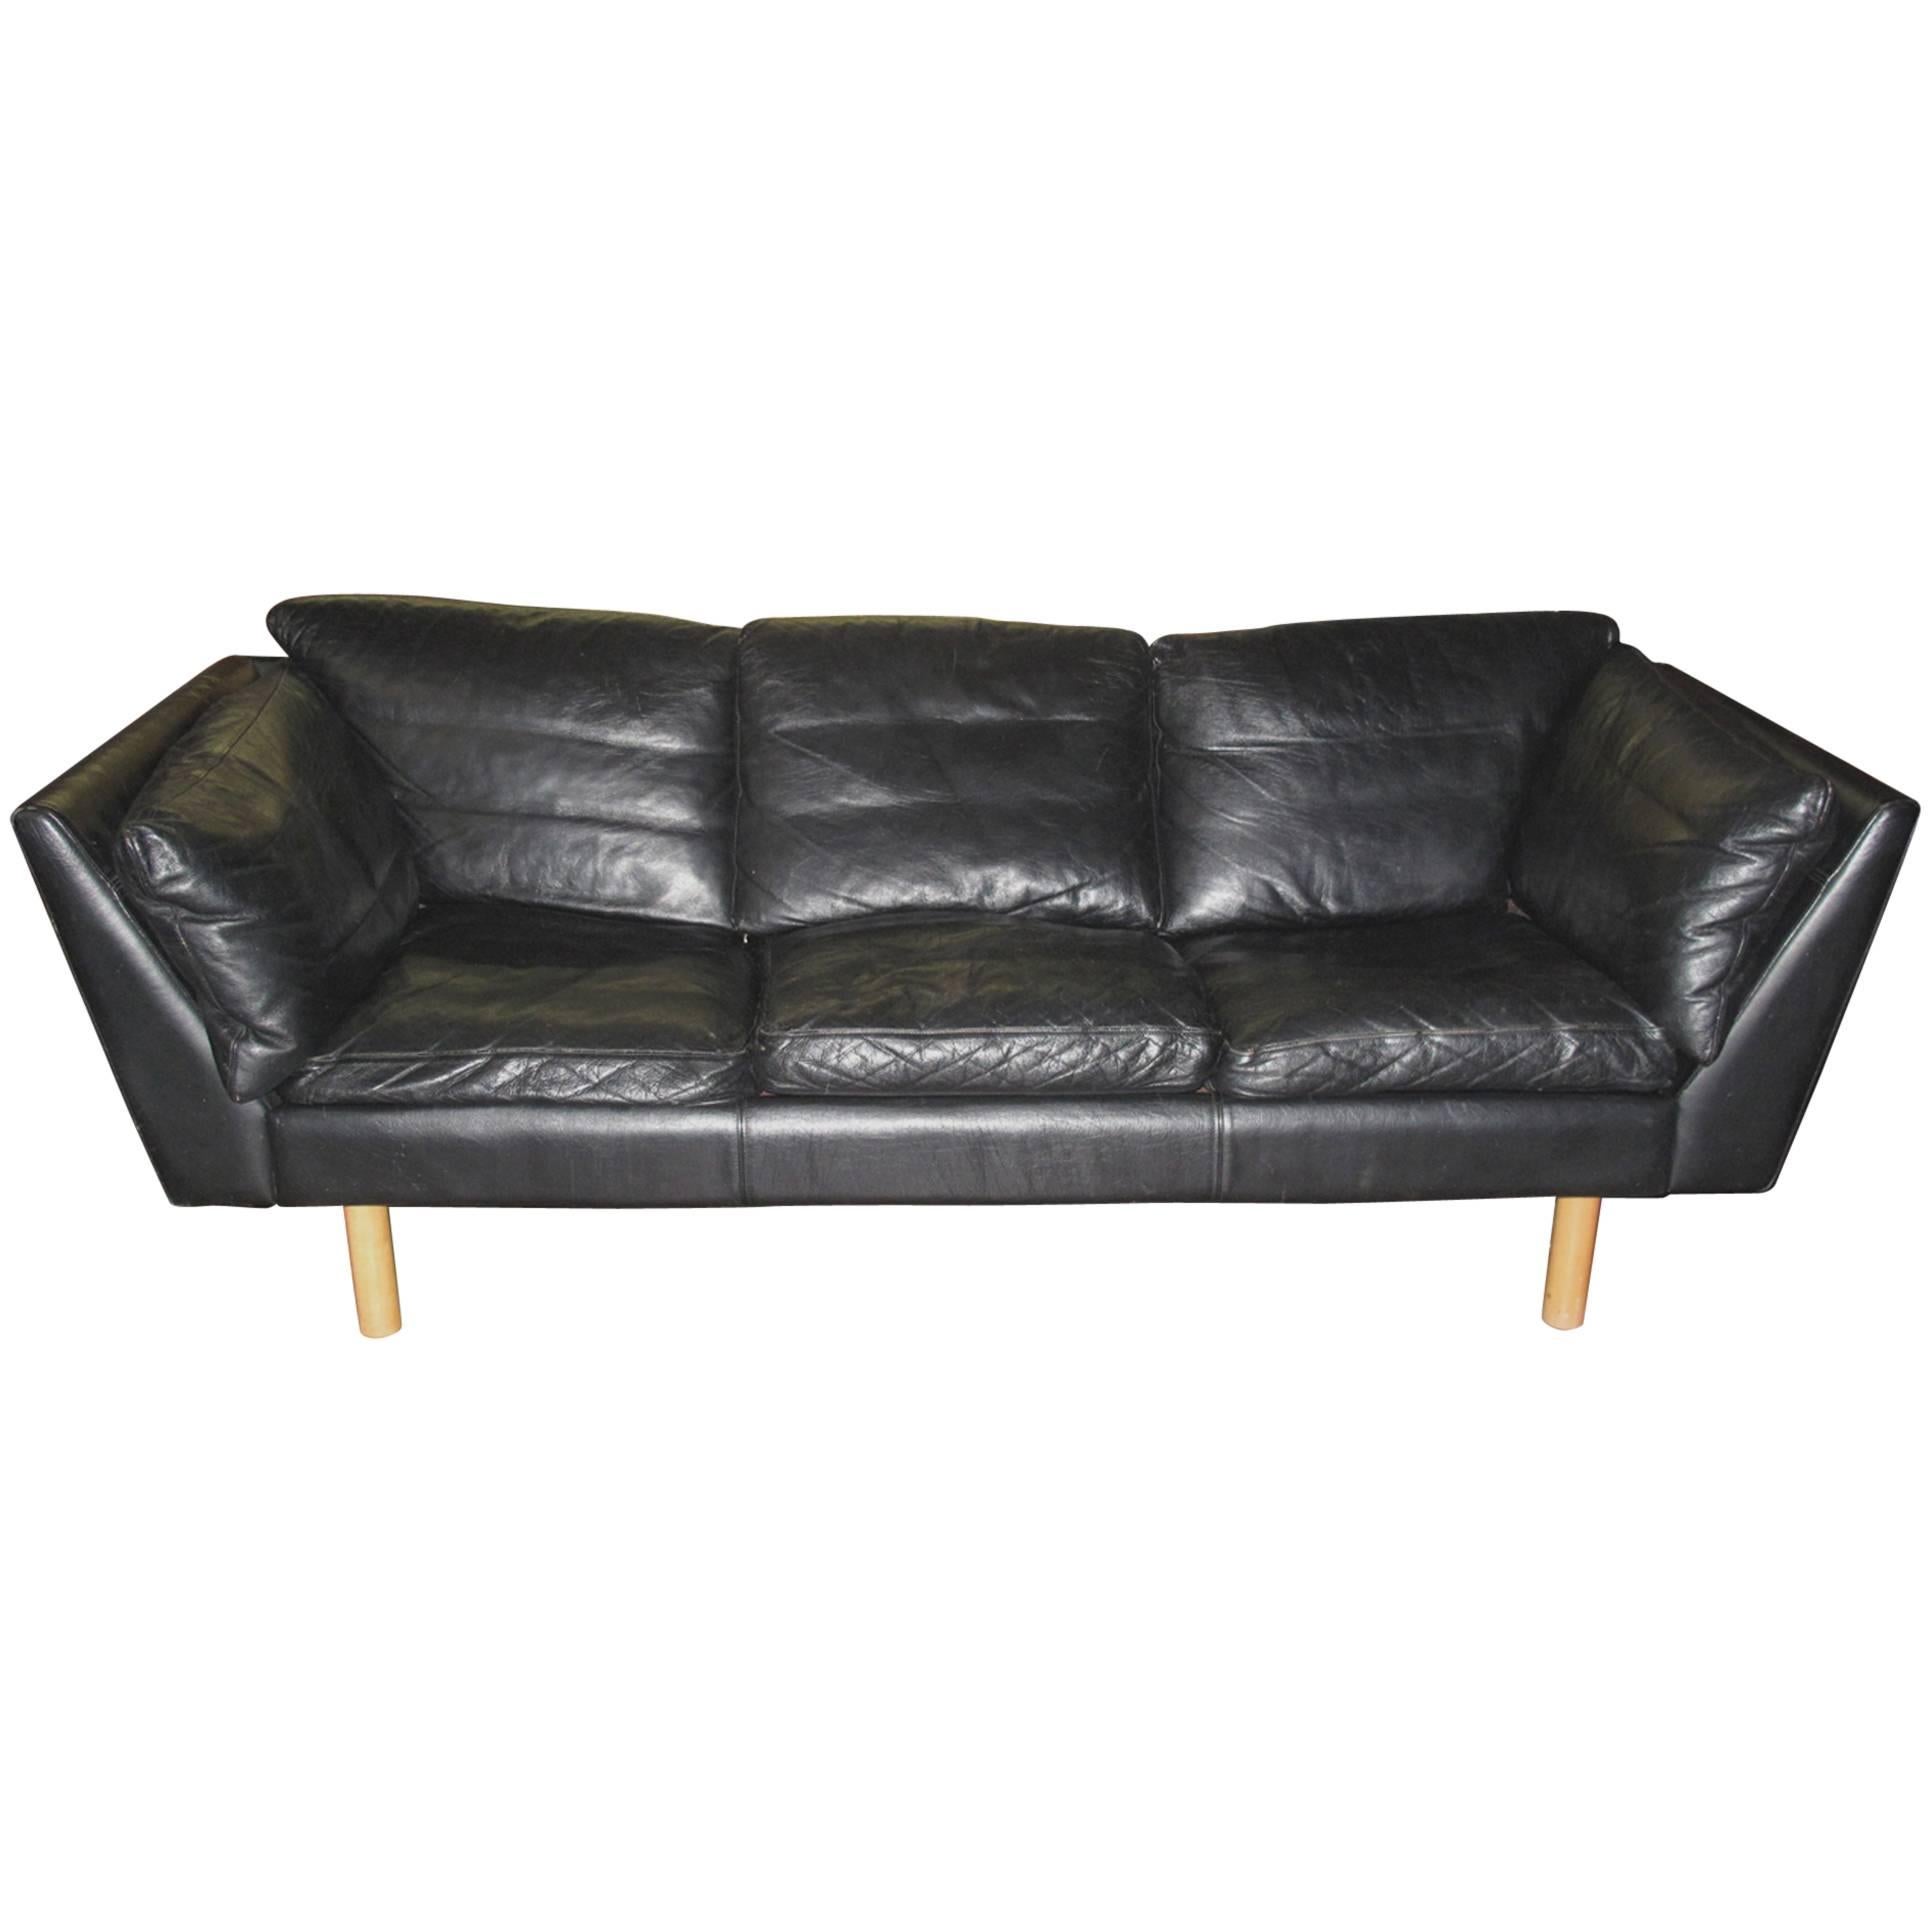 Danish 1970s-Early 1980s Black Leather Sofa by Henning Jensen